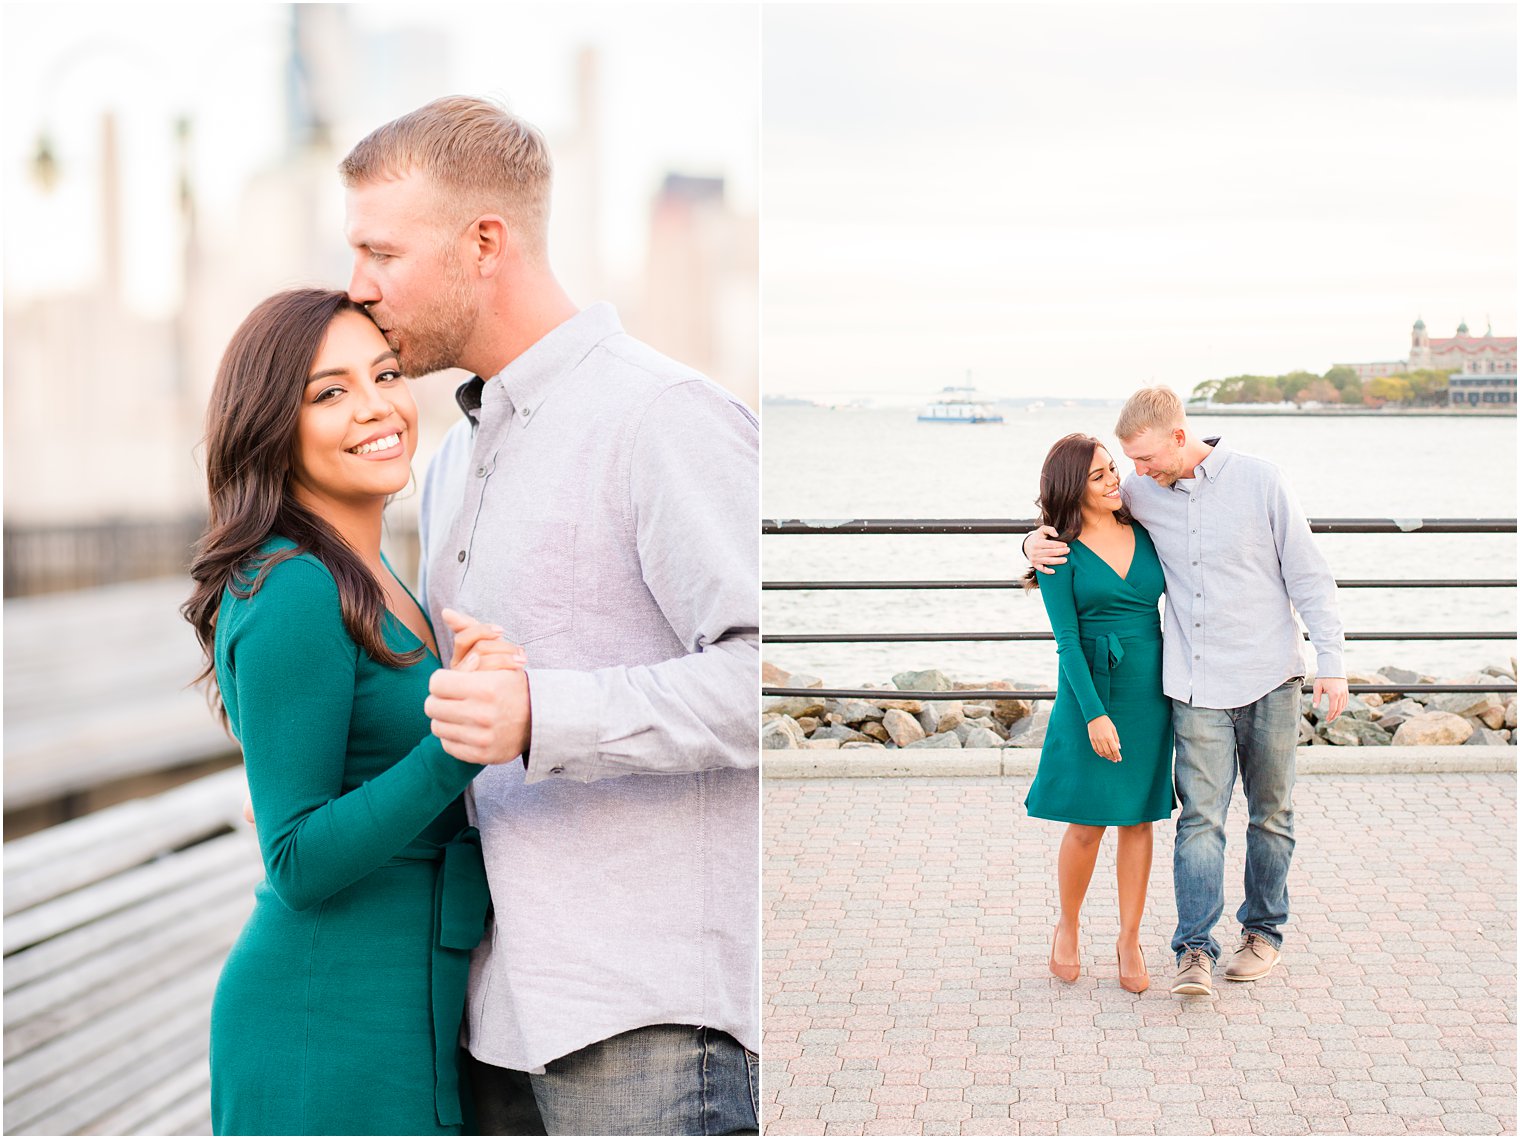 Engagement photo with Ellis Island in the background